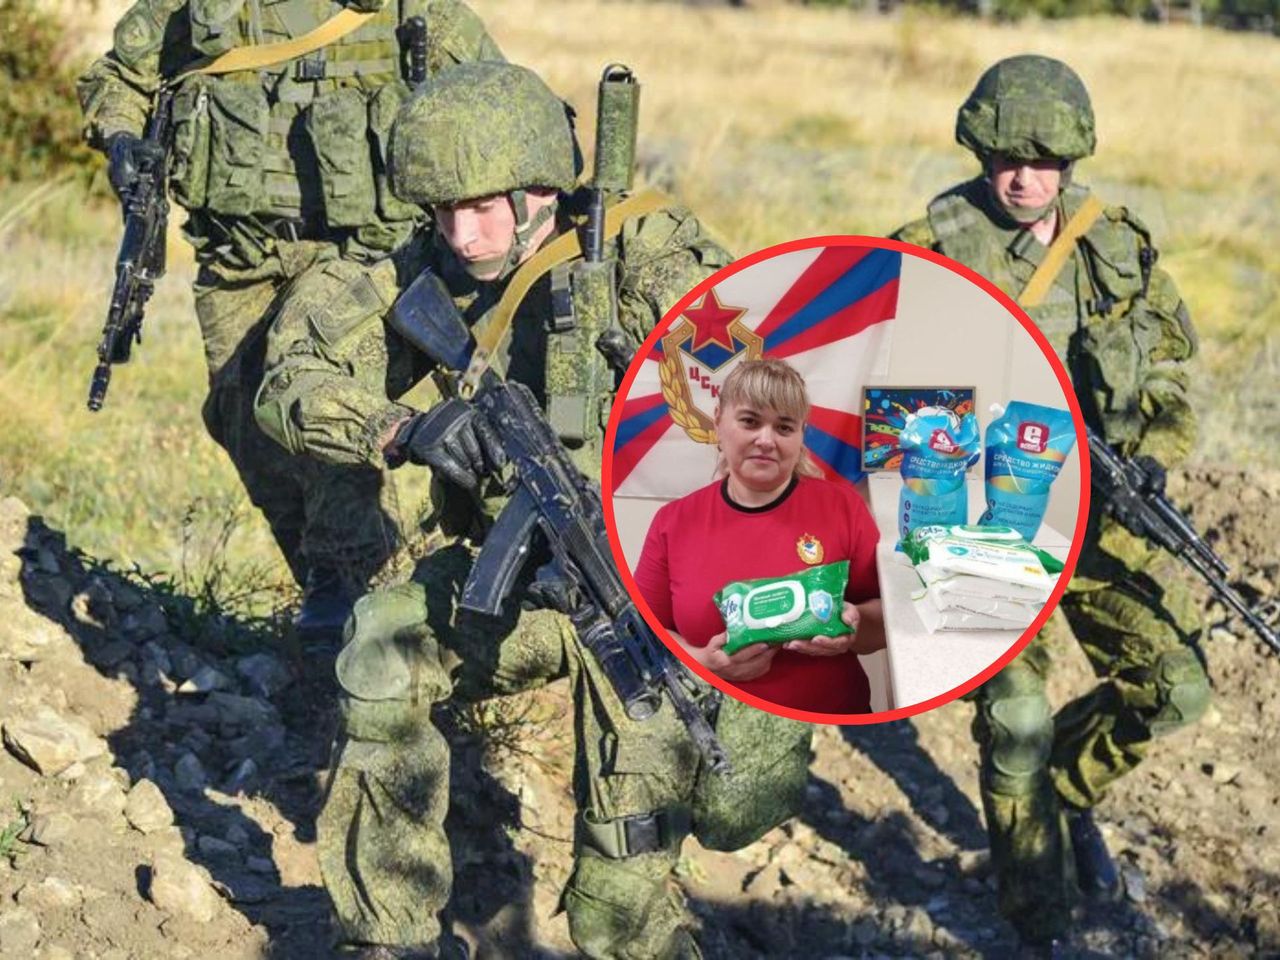 Liquid soap and moisturizing wipes - these are gifts for soldiers from the Russians